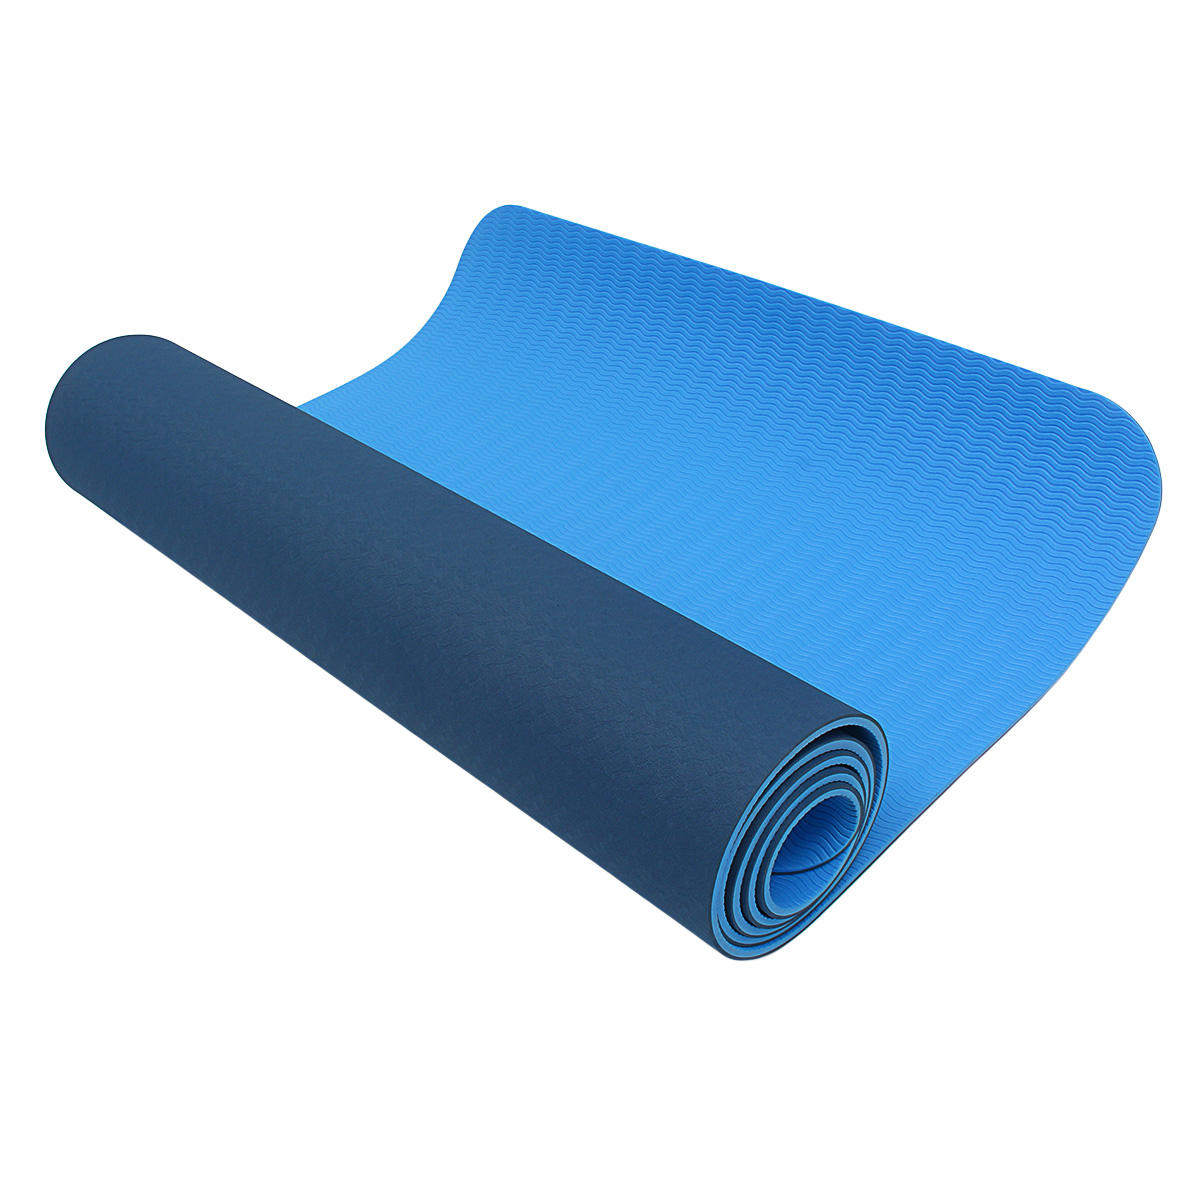 Other Health & Beauty - 183x61x0.6cm Yoga Mat Workout Exercise Mat Gym ...